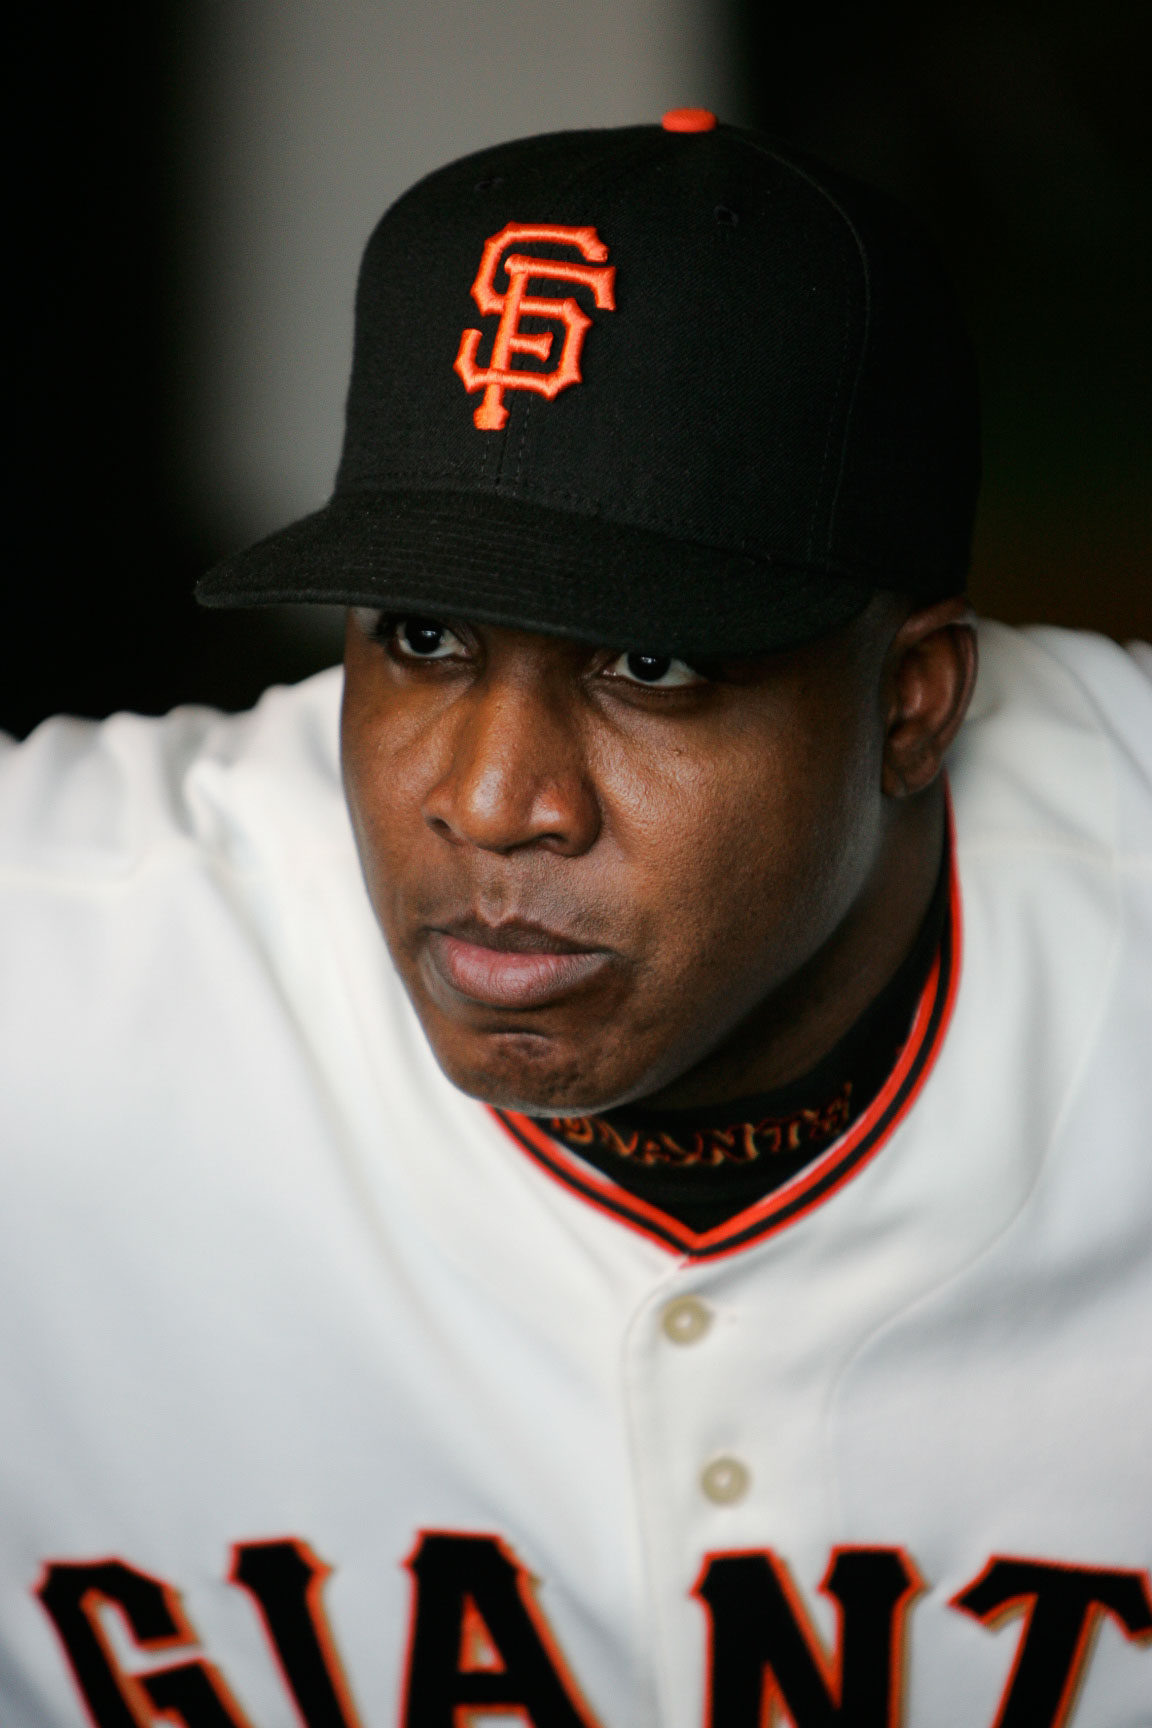 Barry Bonds at AT&T Park setting 756th Home Run Record